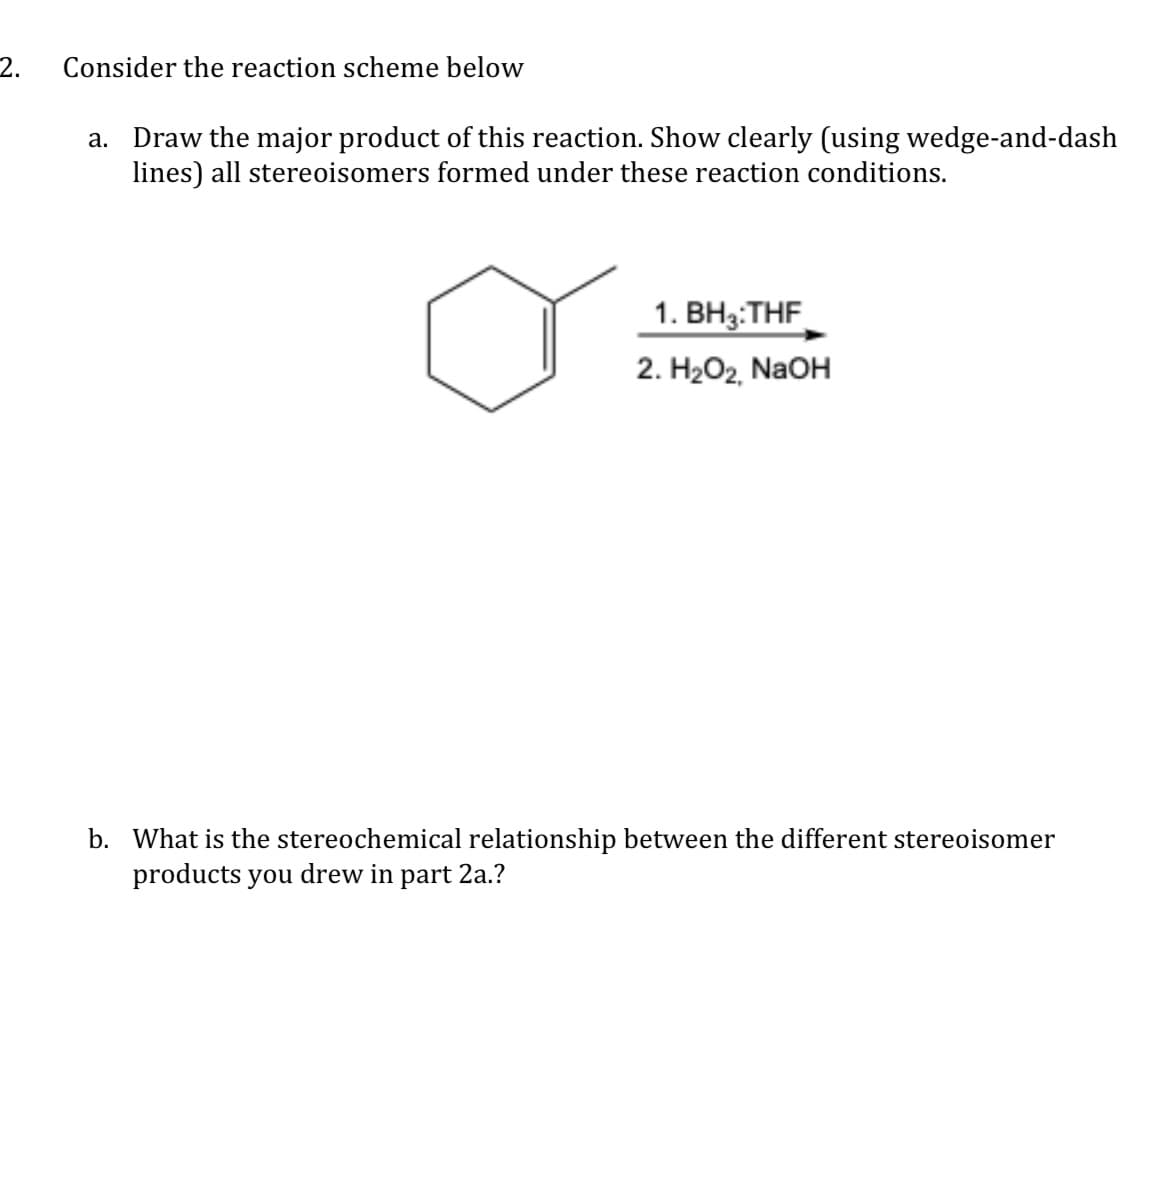 2.
Consijder the reactiojn scheme below
a. Draw the major product of this reaction. Show clearly (using wedge-and-dash
lines) all stereoisomers formed under these reaction conditions.
1. BH3:THF
2. H2O2, NaOH
b. What is the stereochemical relationship between the different stereoisomer
products you drew in part 2a.?
